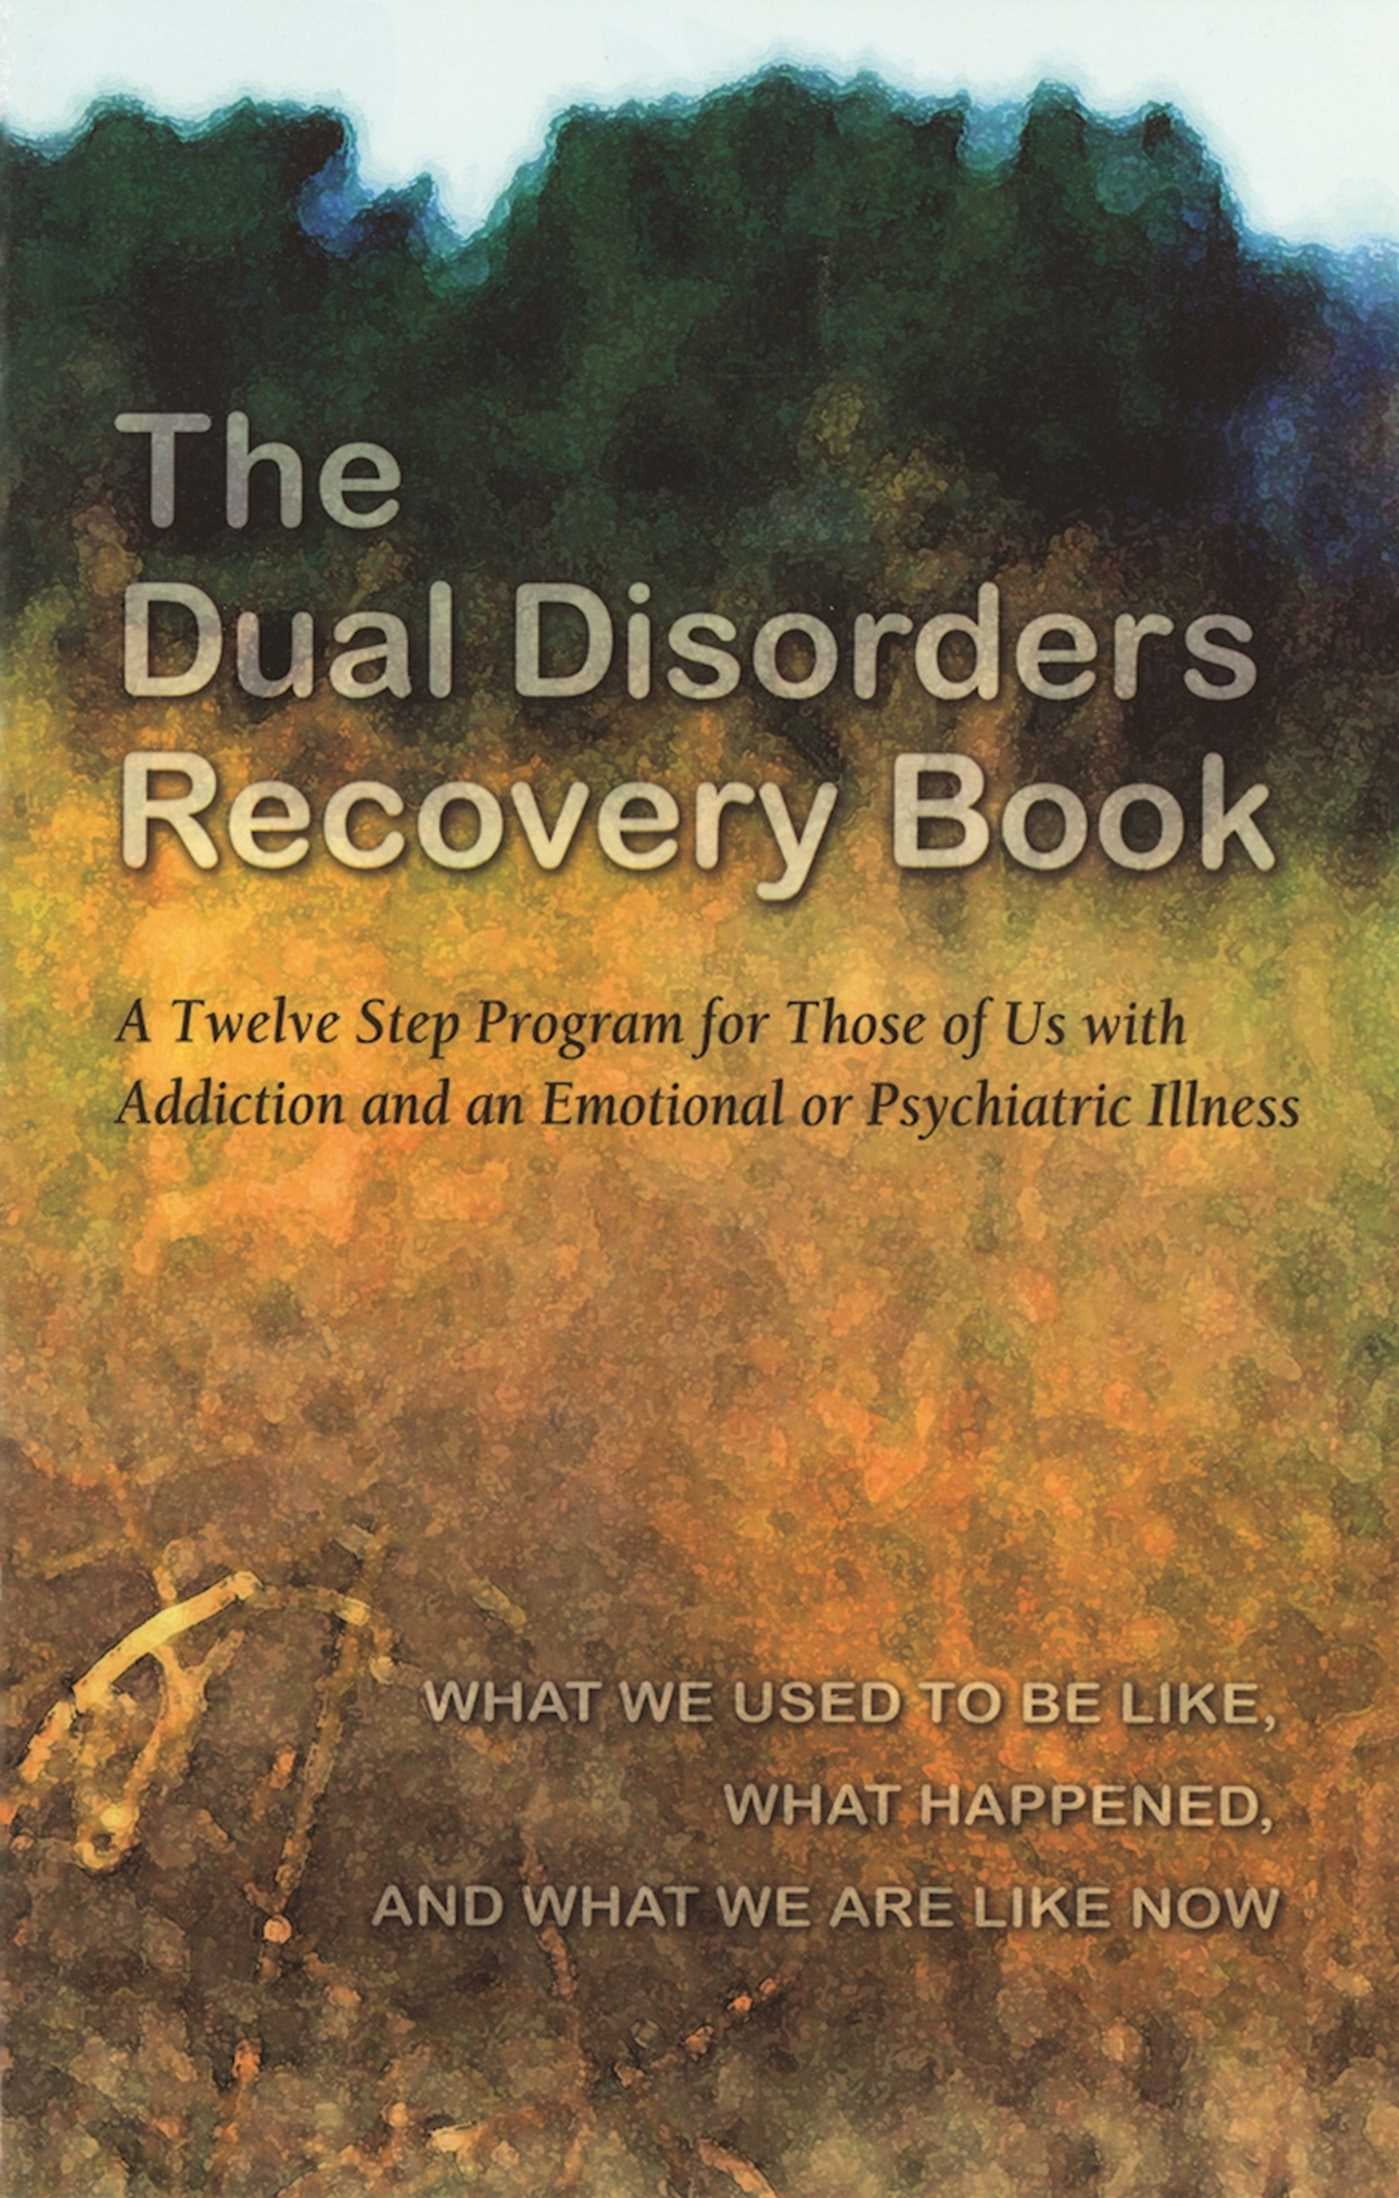 The Dual Disorders Recovery Book : A Twelve Step Program for Those of Us with Addiction and an Emotional or Psychiatric Illness